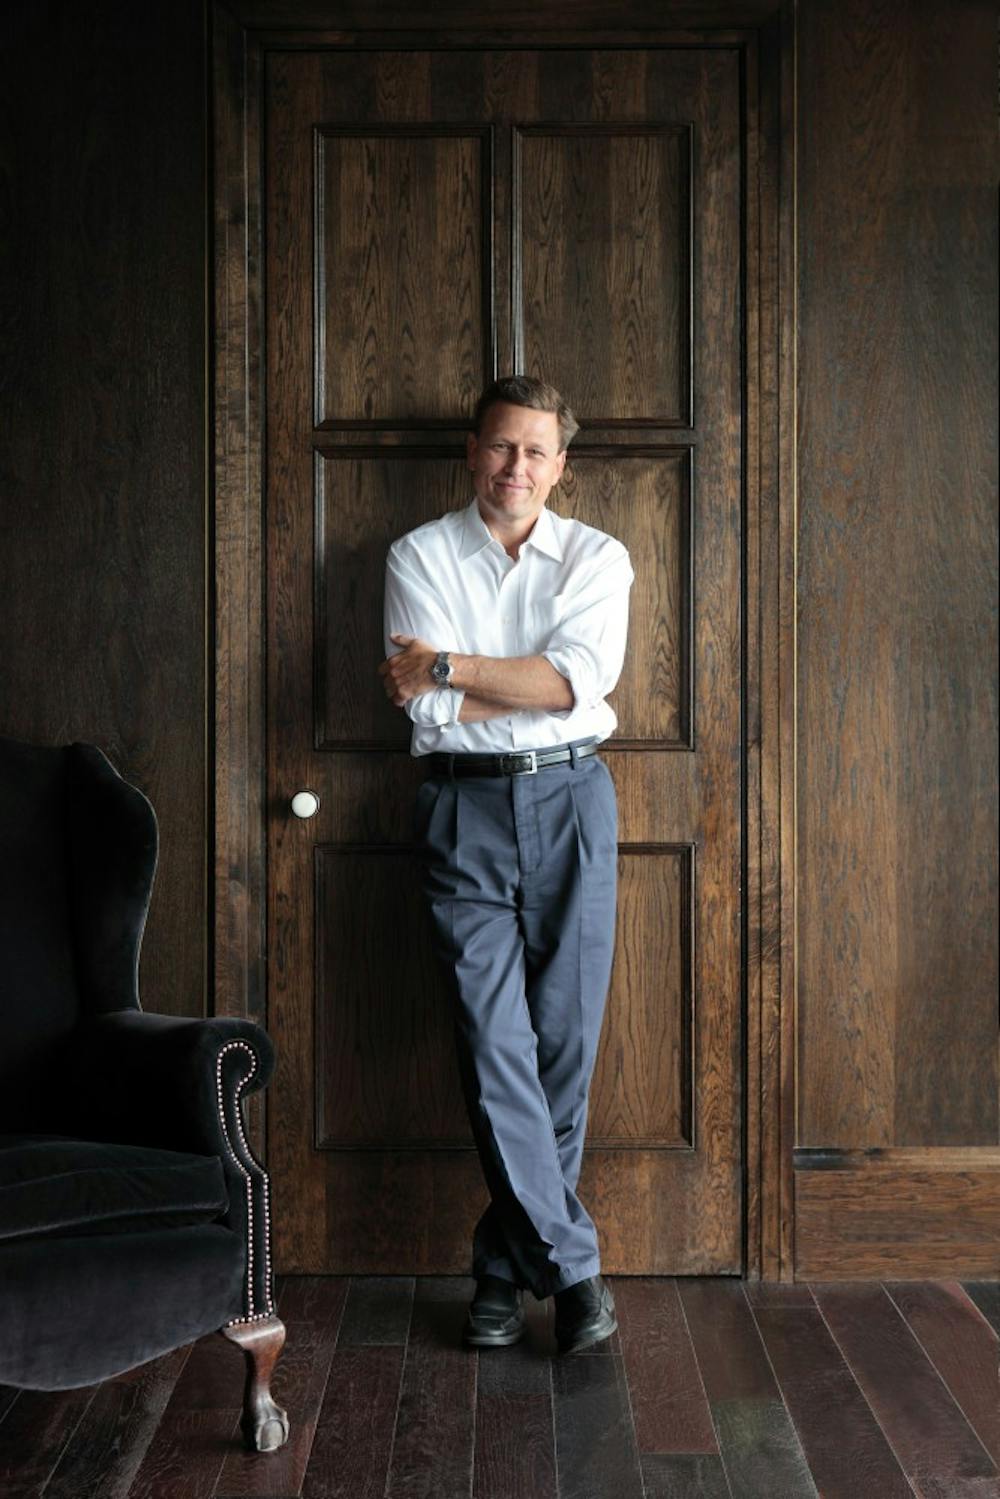 	Bestselling author and U.Va. Law alumnus David Baldacci spoke at the Omni Hotel on March 20th for Virginia Festival of the Book. 